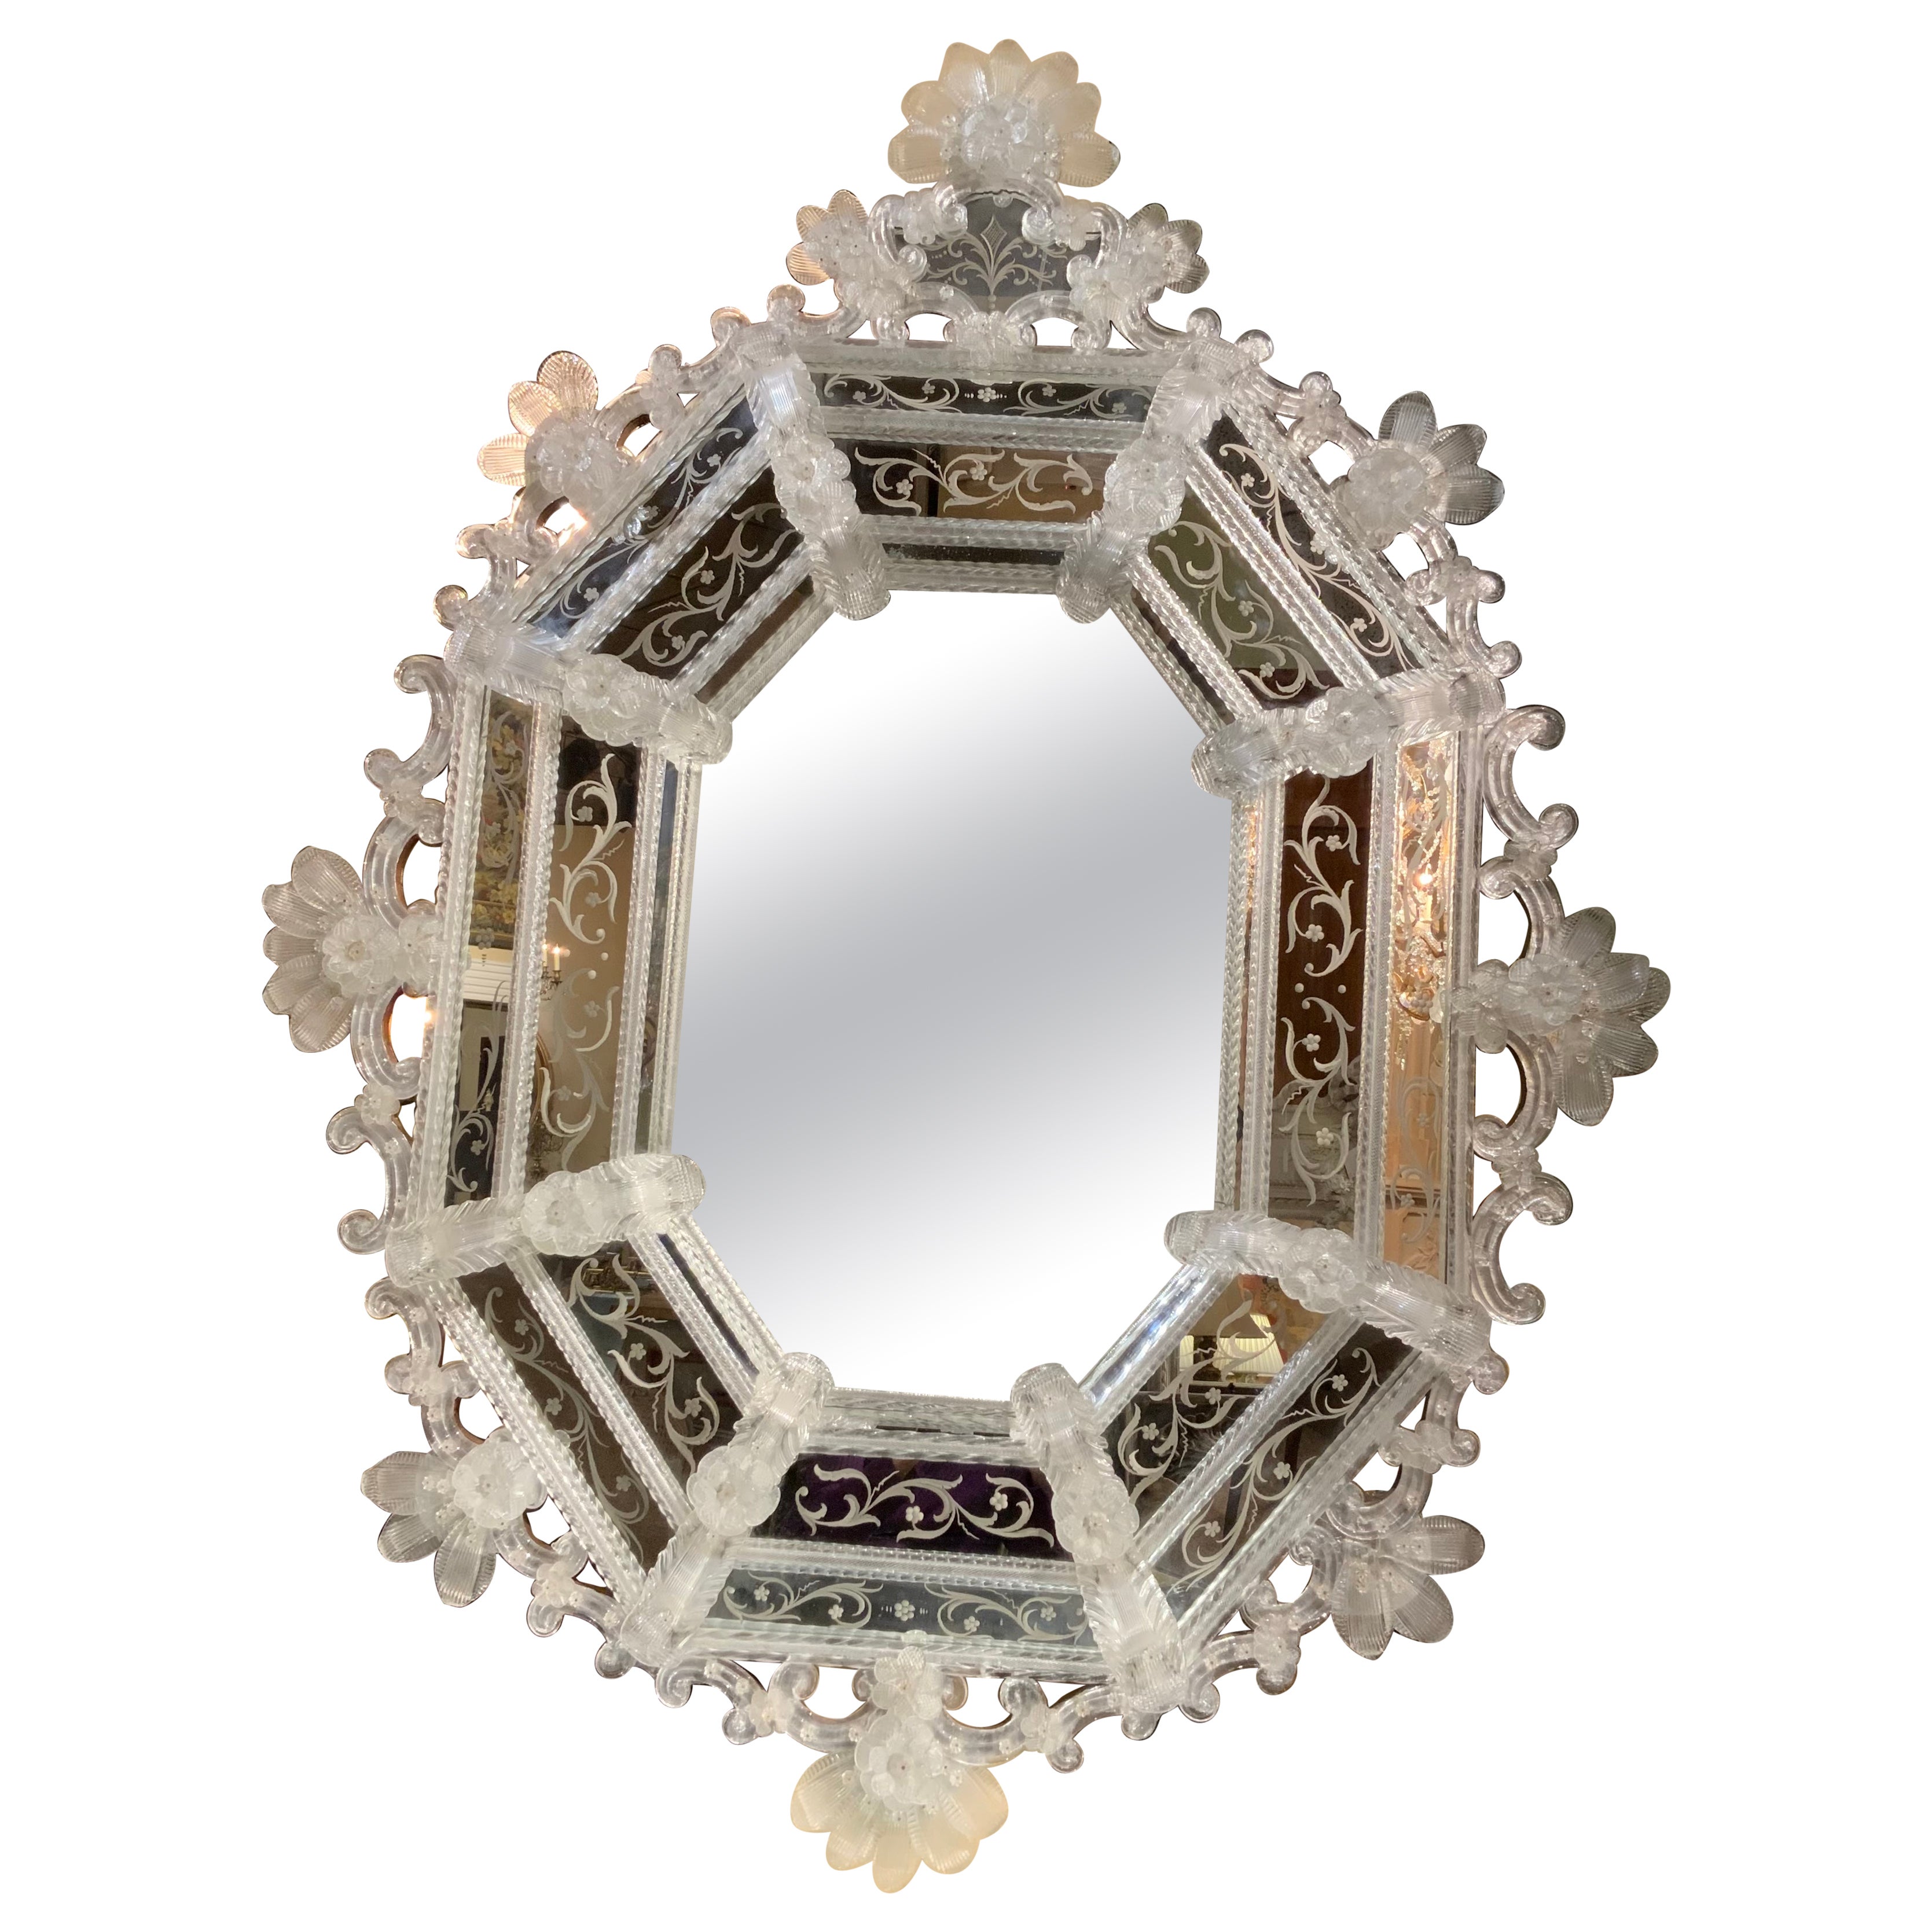 Large Venetian Wall Mirror with Ornate Etchings and Floral Decorations For Sale